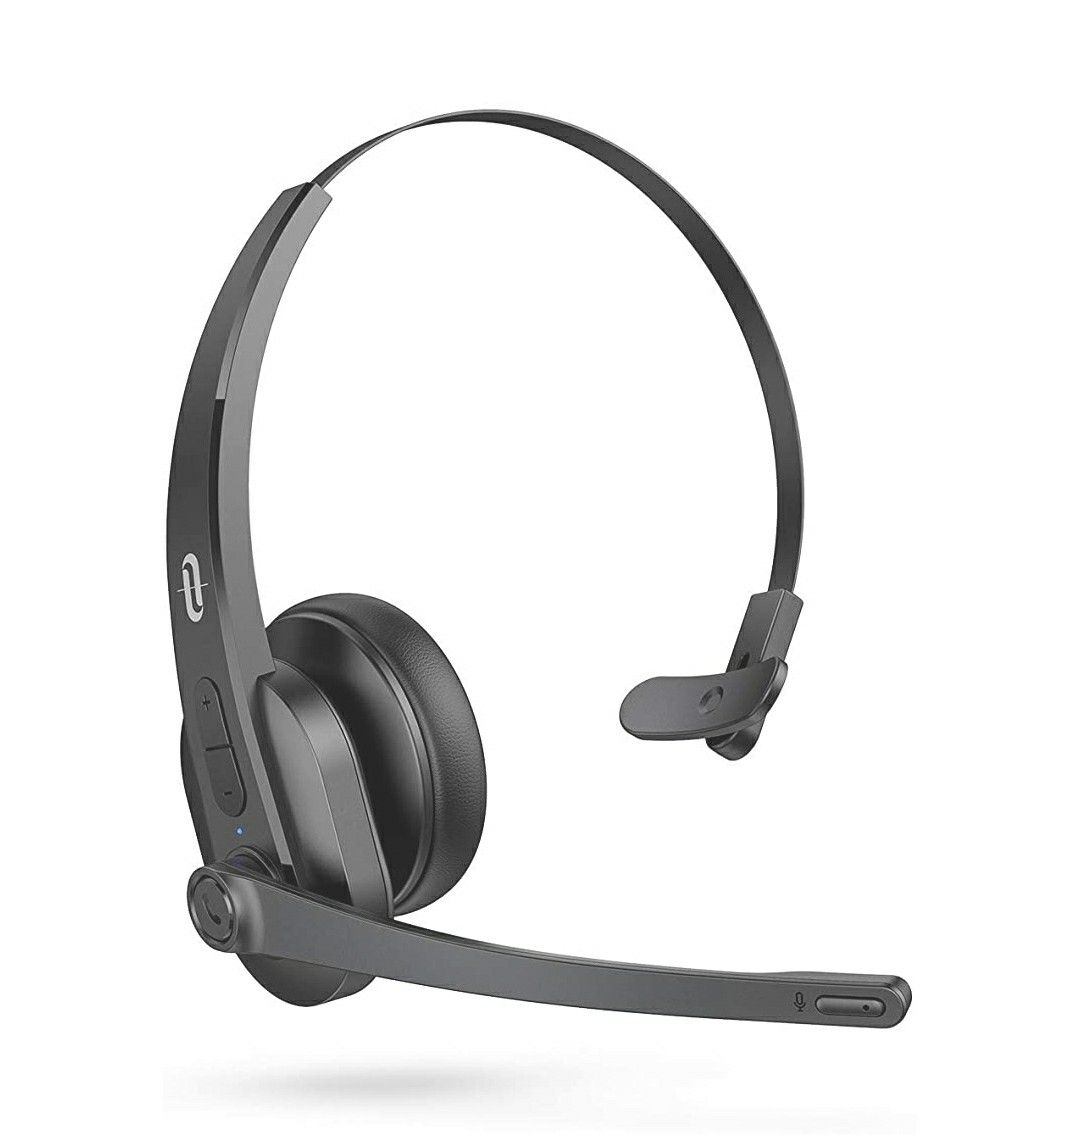 Trucker Bluetooth Headset with Microphone